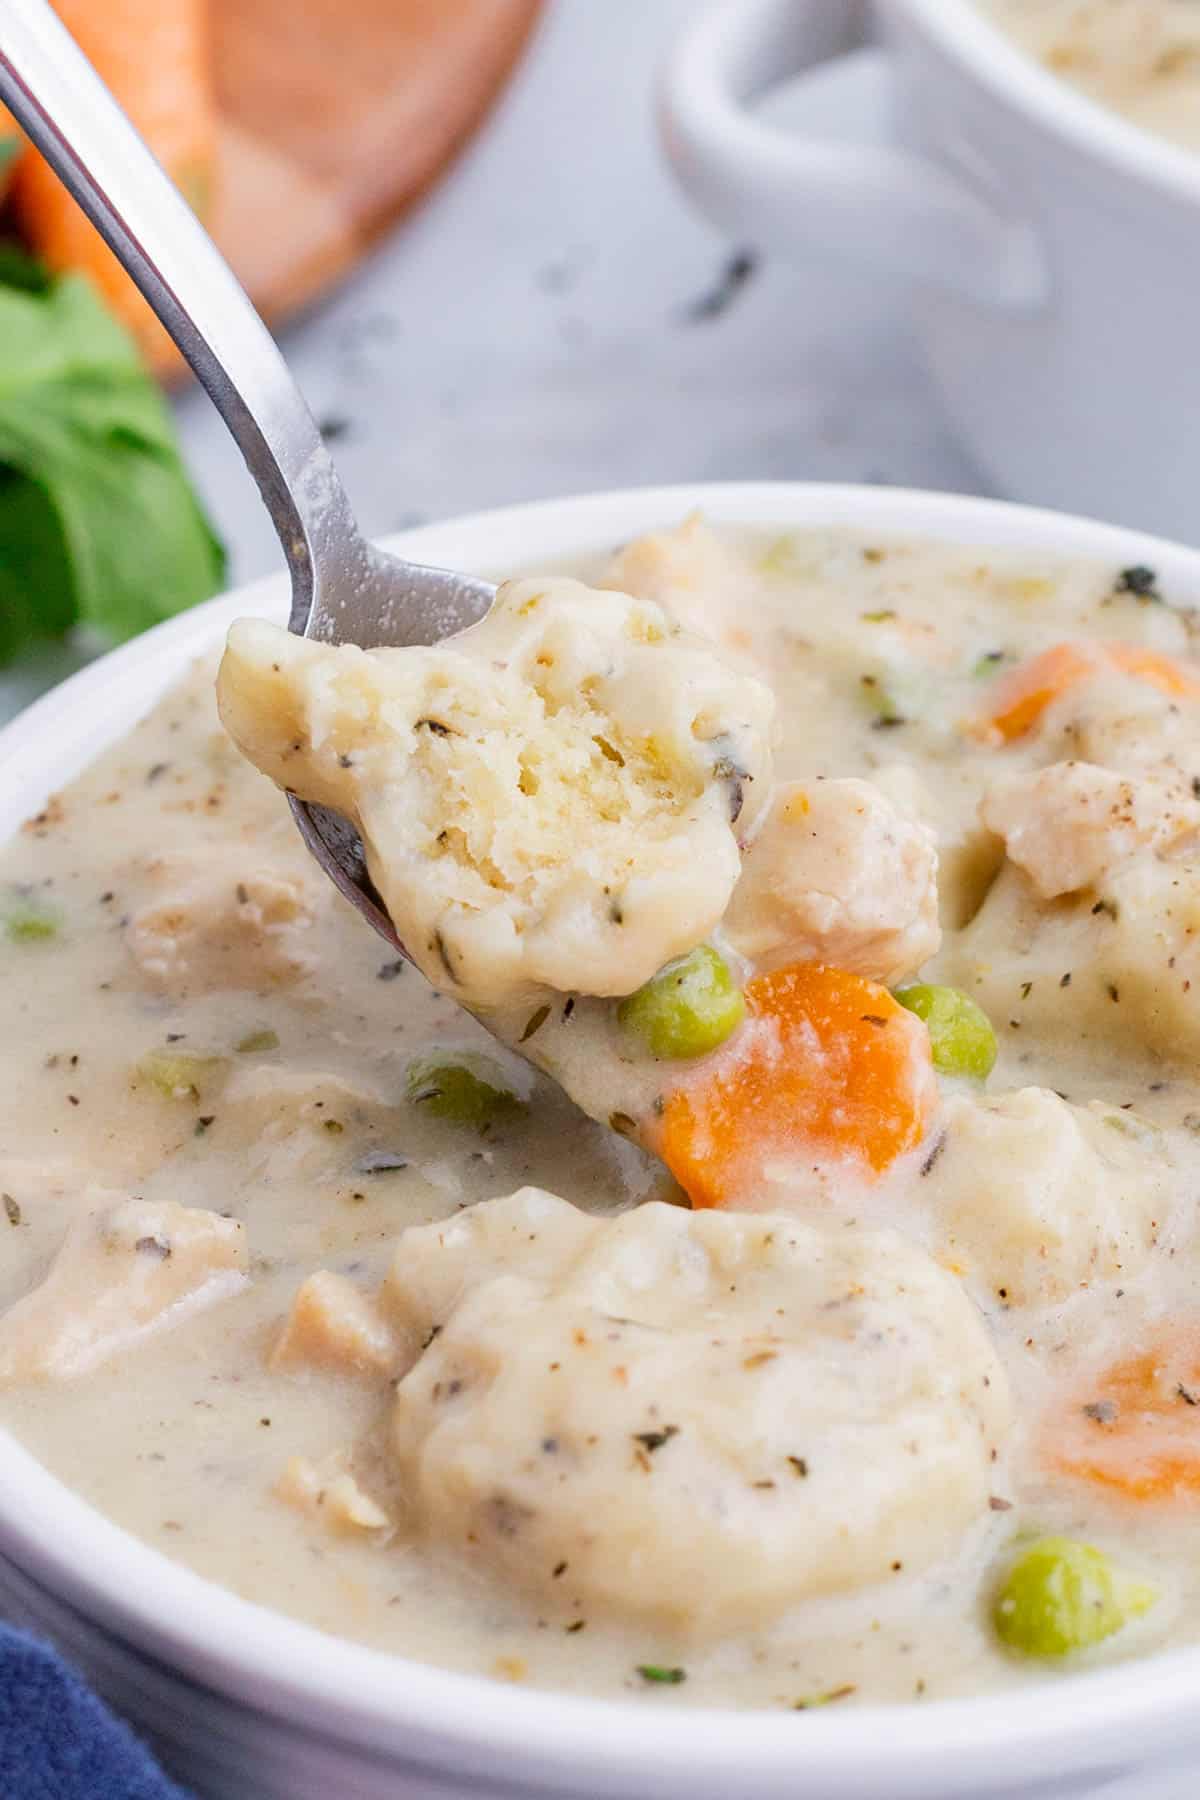 A spoon scoops out a serving of chicken dumpling soup with carrots and celery.